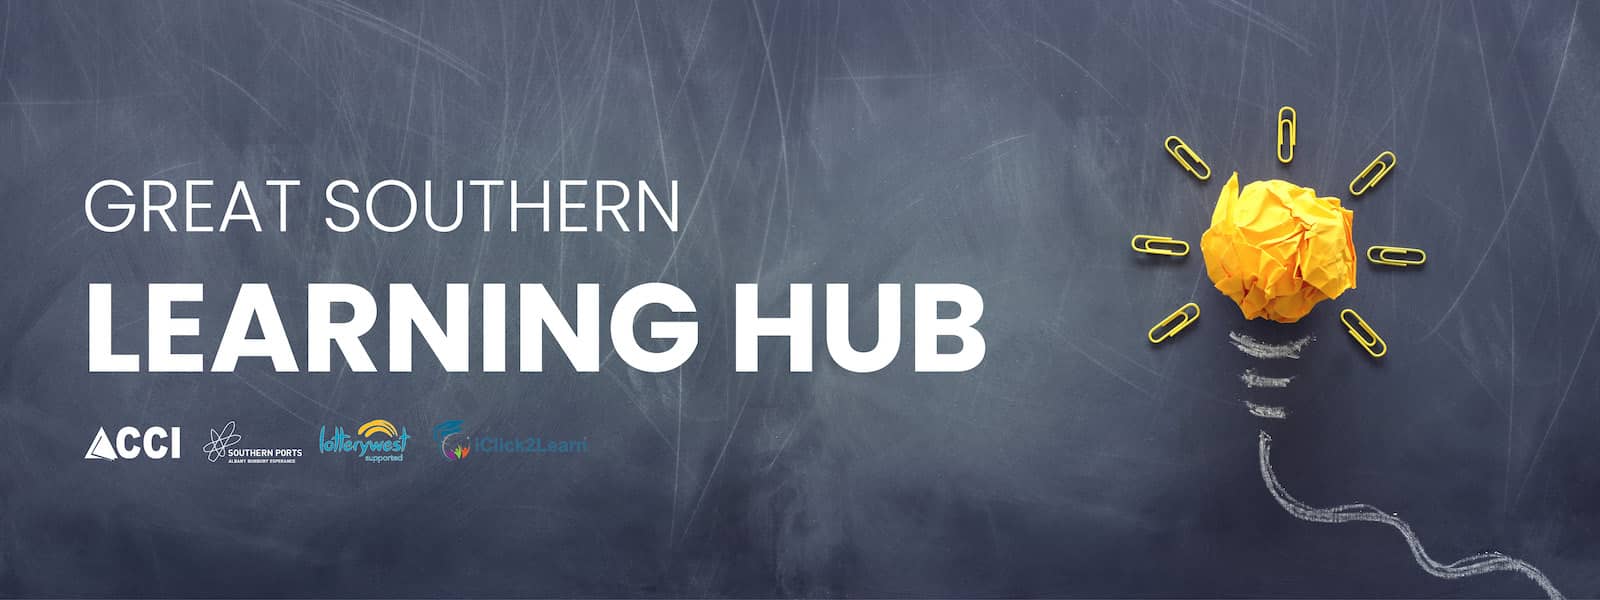 Great Southern Hub Banner